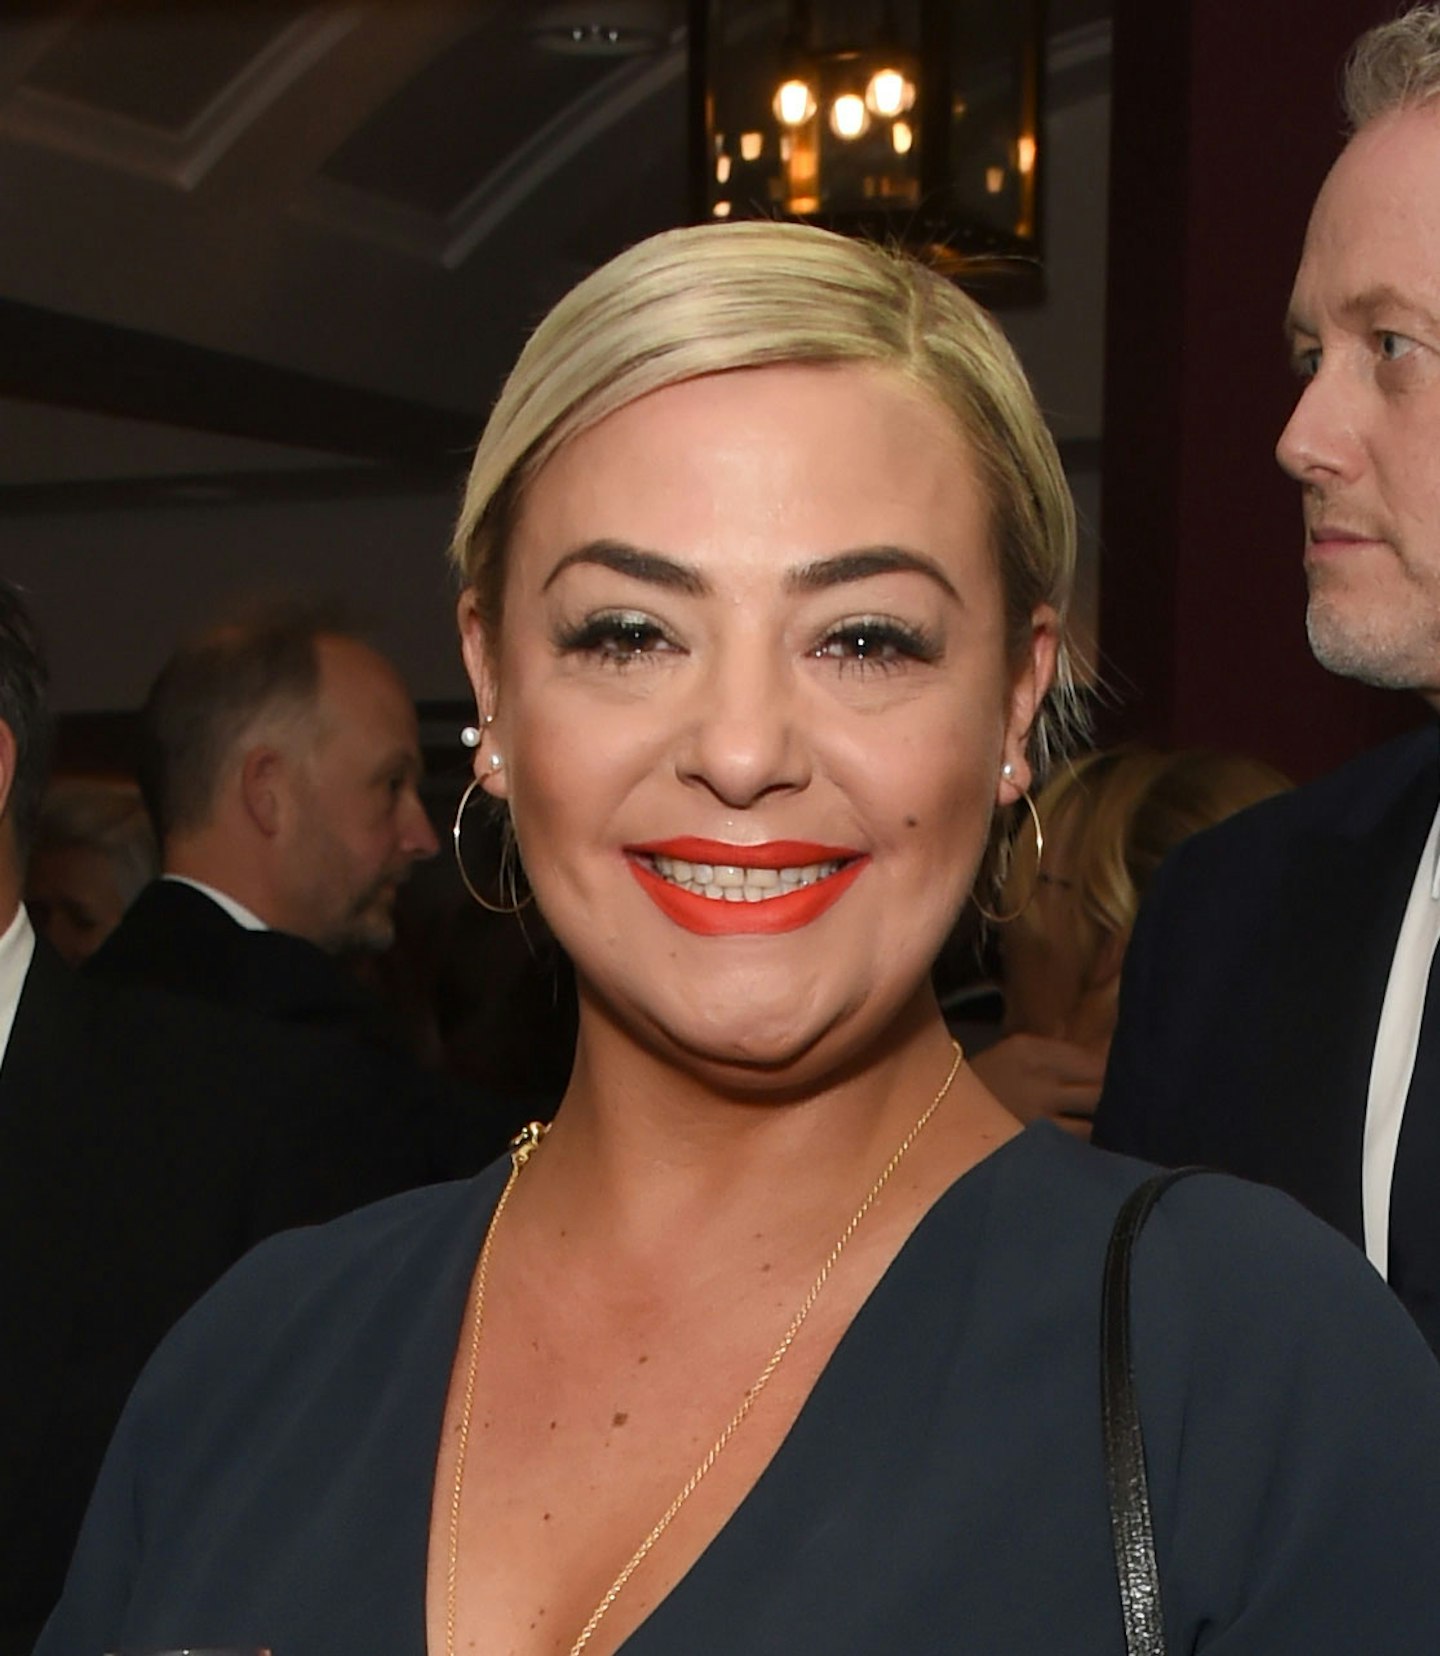 Lisa Armstrong gets her happy ending with boyfriend James Green following Ant McPartlin divorce